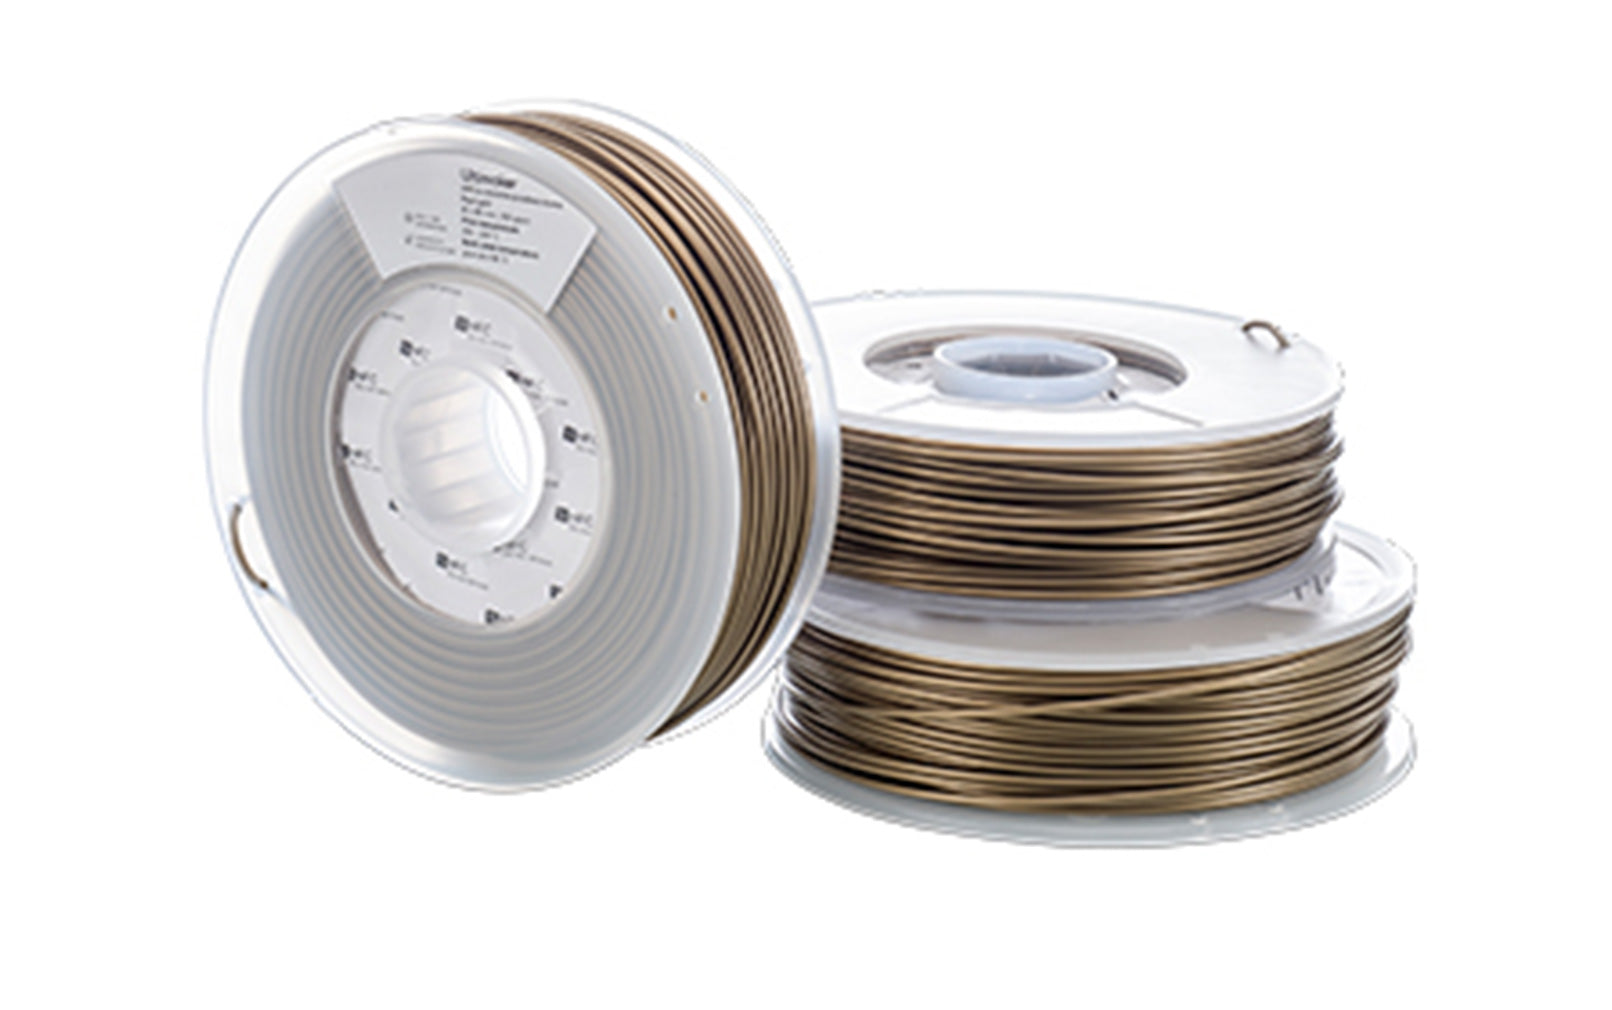 Filamento Ultimaker ABS M2560 Pearl Gold 750GR / 2.85mm